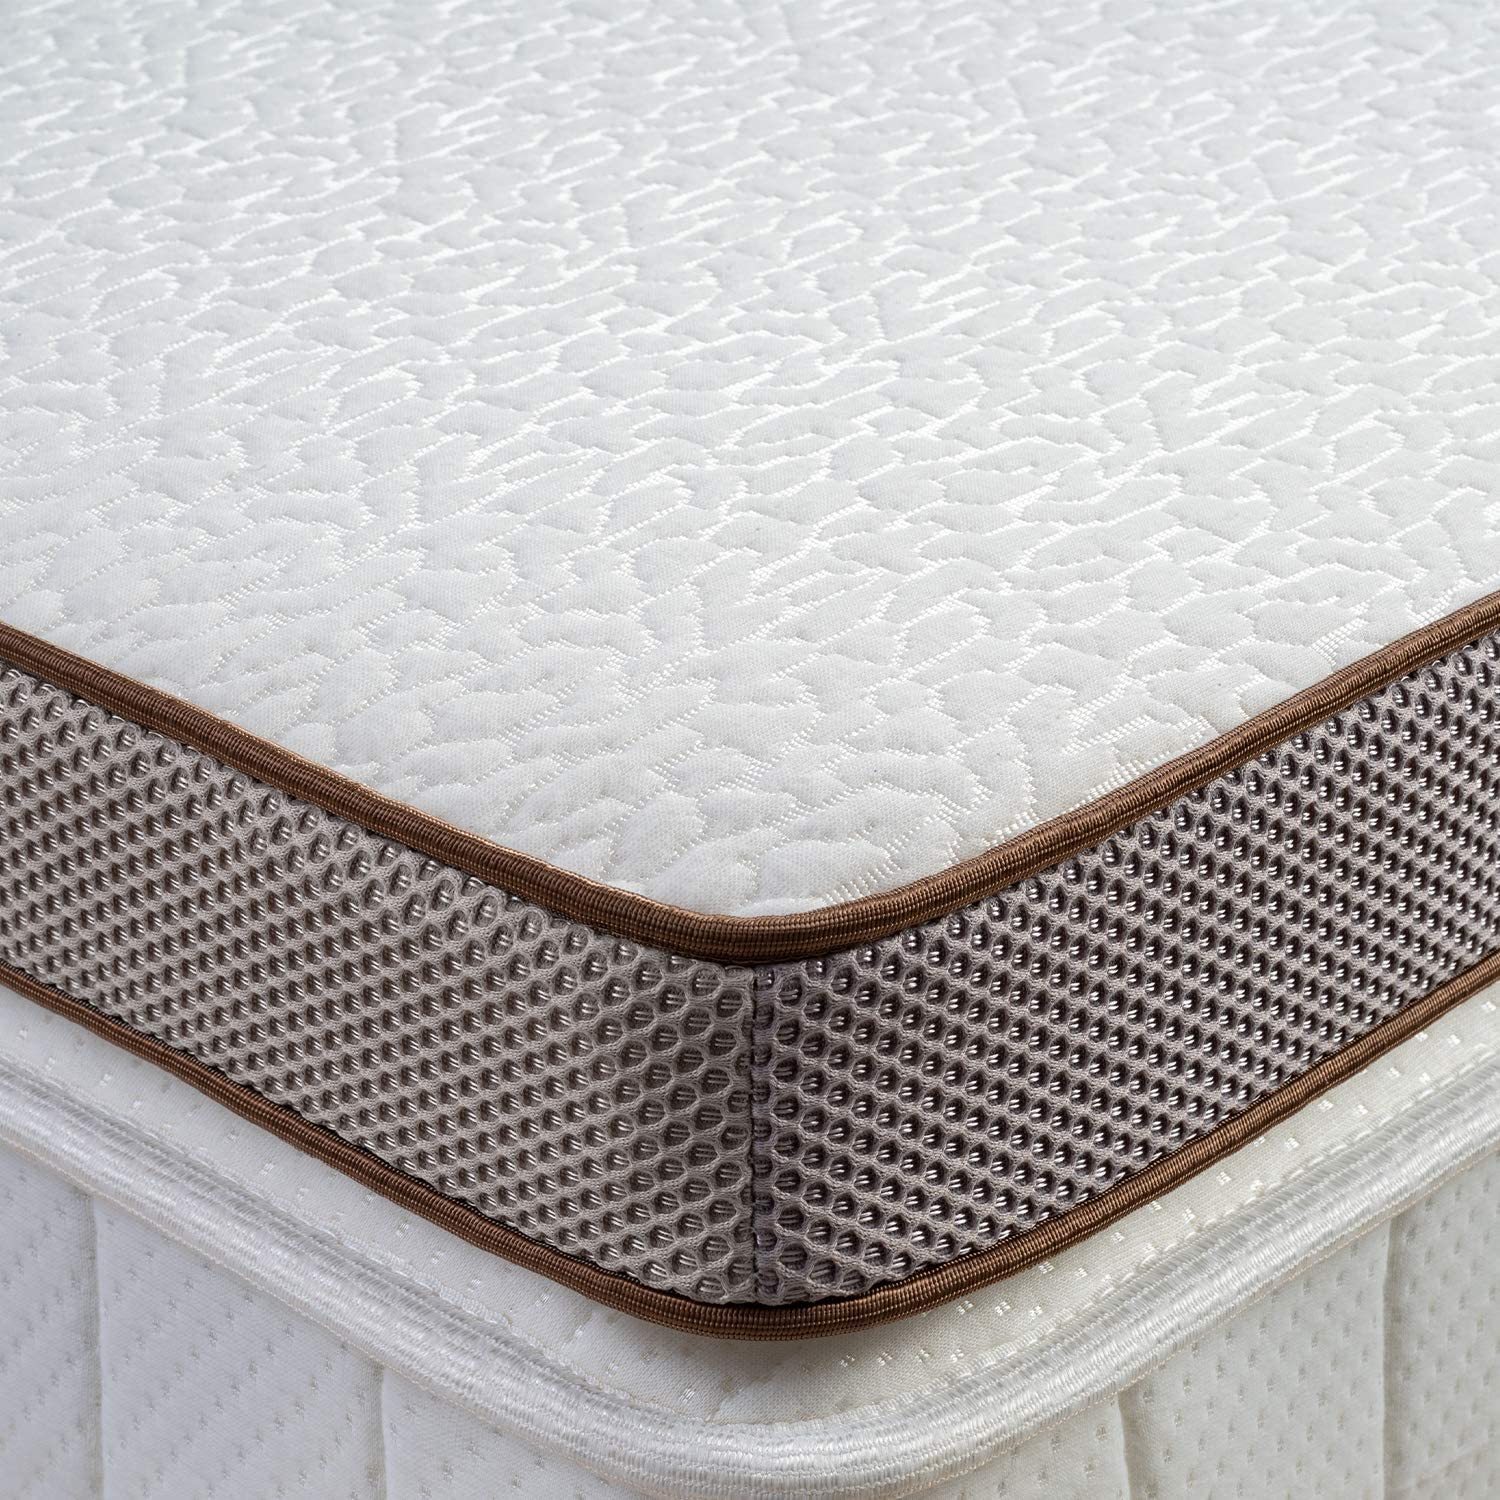 BedStory 4 Inch Memory Foam Mattress Topper, Queen Size Gel Infused Bed Toppers, - $198.99